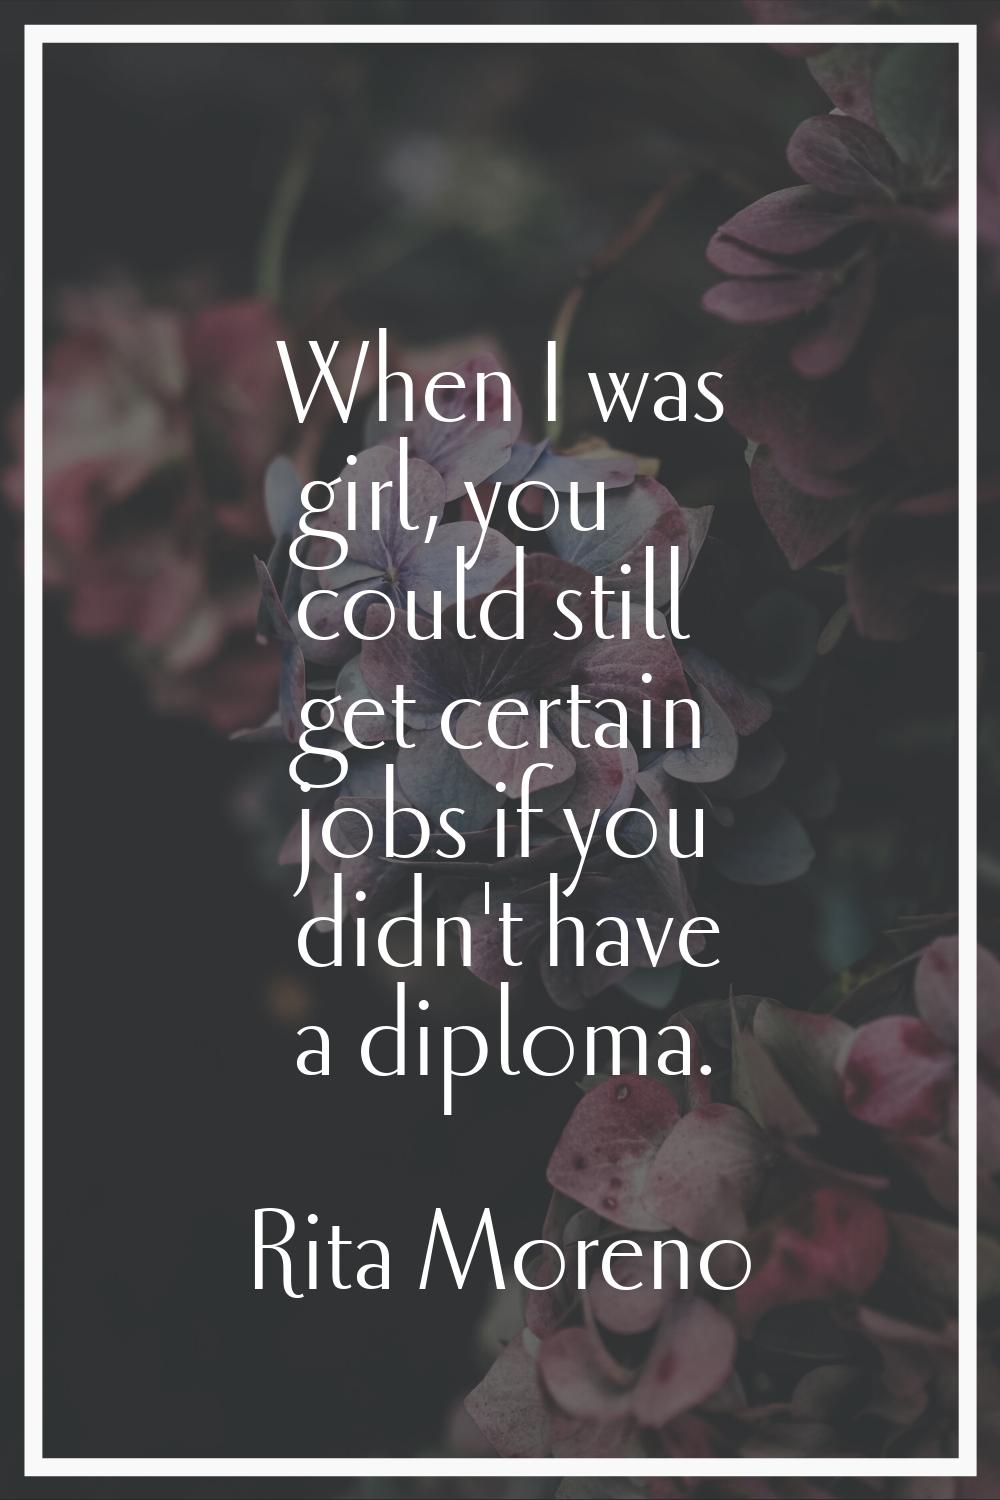 When I was girl, you could still get certain jobs if you didn't have a diploma.